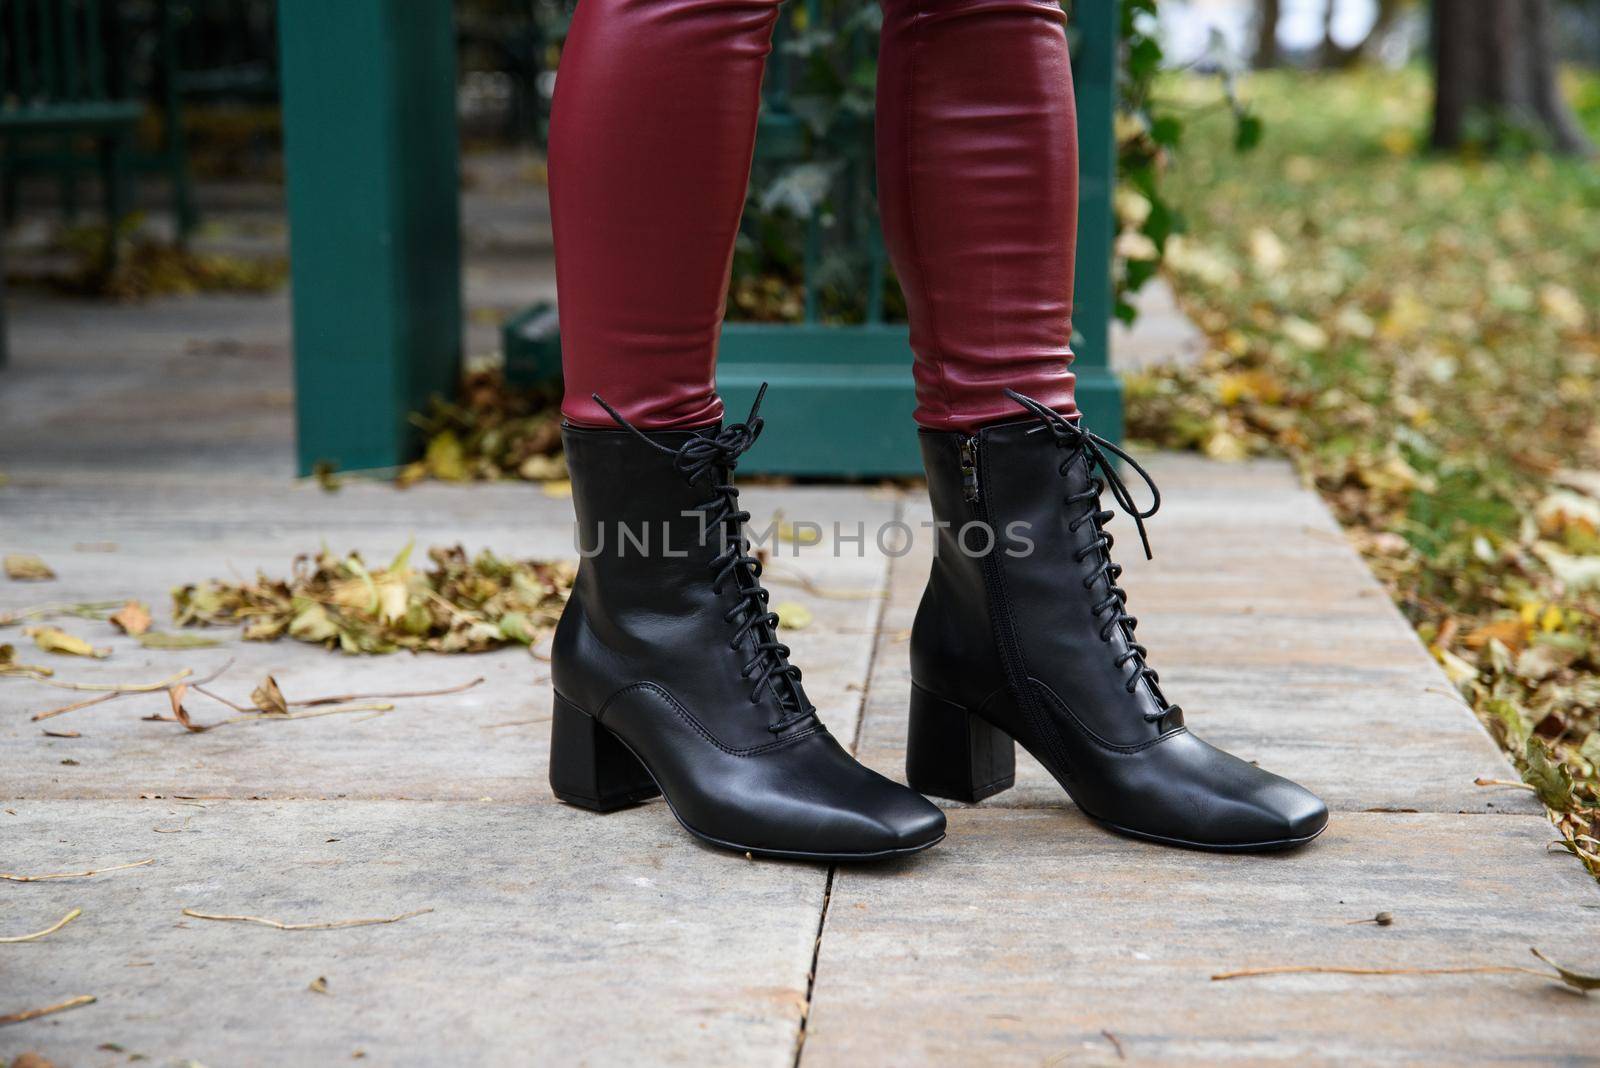 Amaze low lace up square toe block heel ankle black leather boots. top view. red leggings by Ashtray25